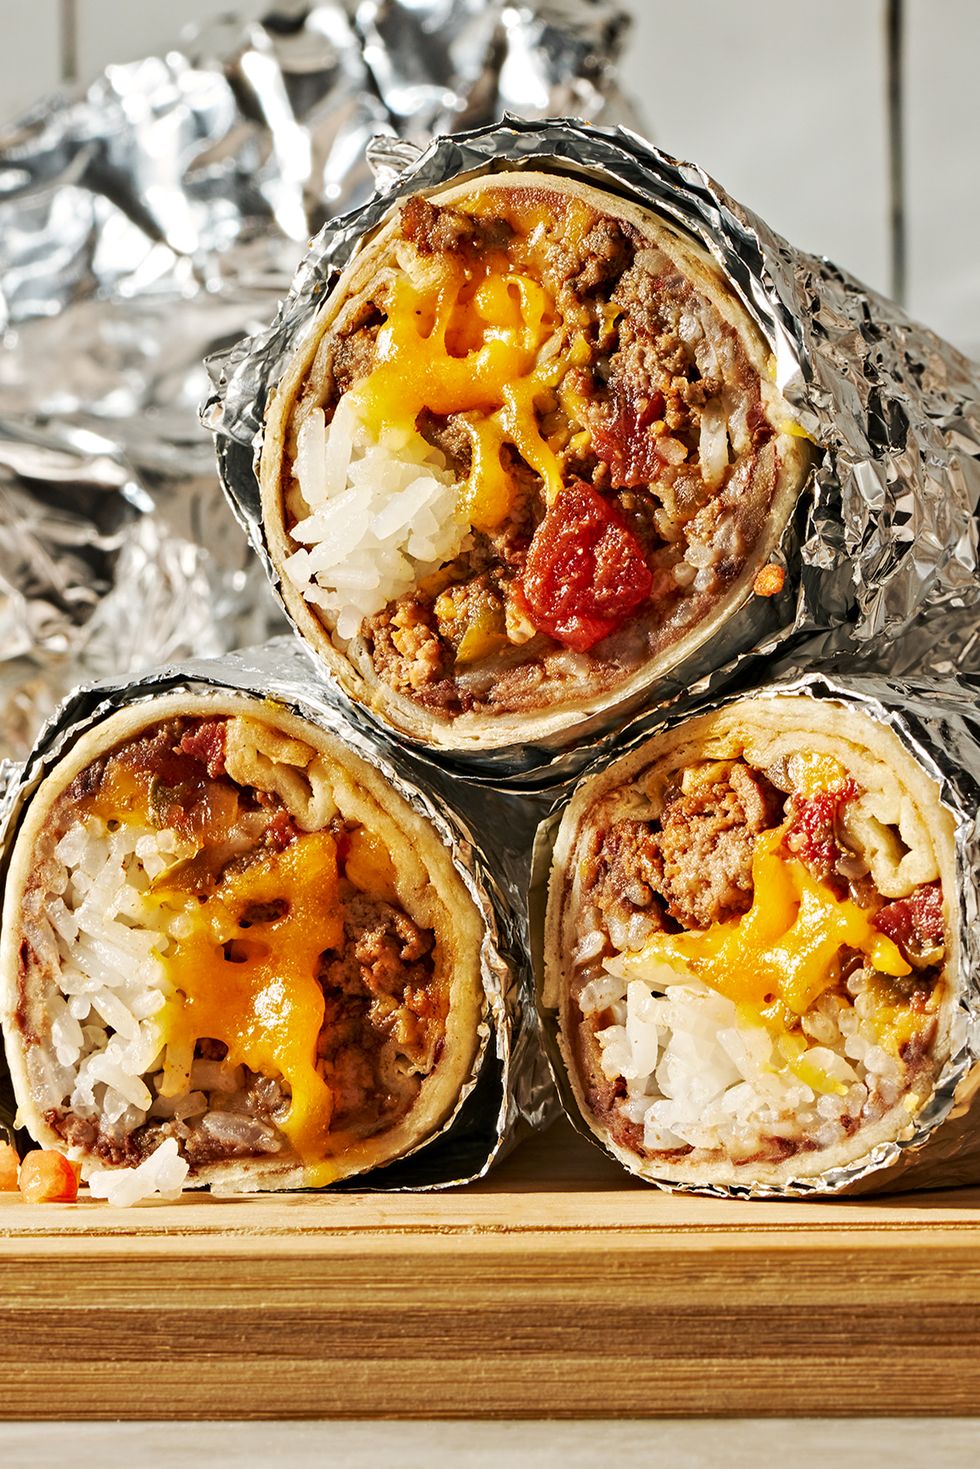 seasoned ground beef layered with refried beans, rice, and a blend of monterey jack and cheddar cheese then rolled into a flour tortilla